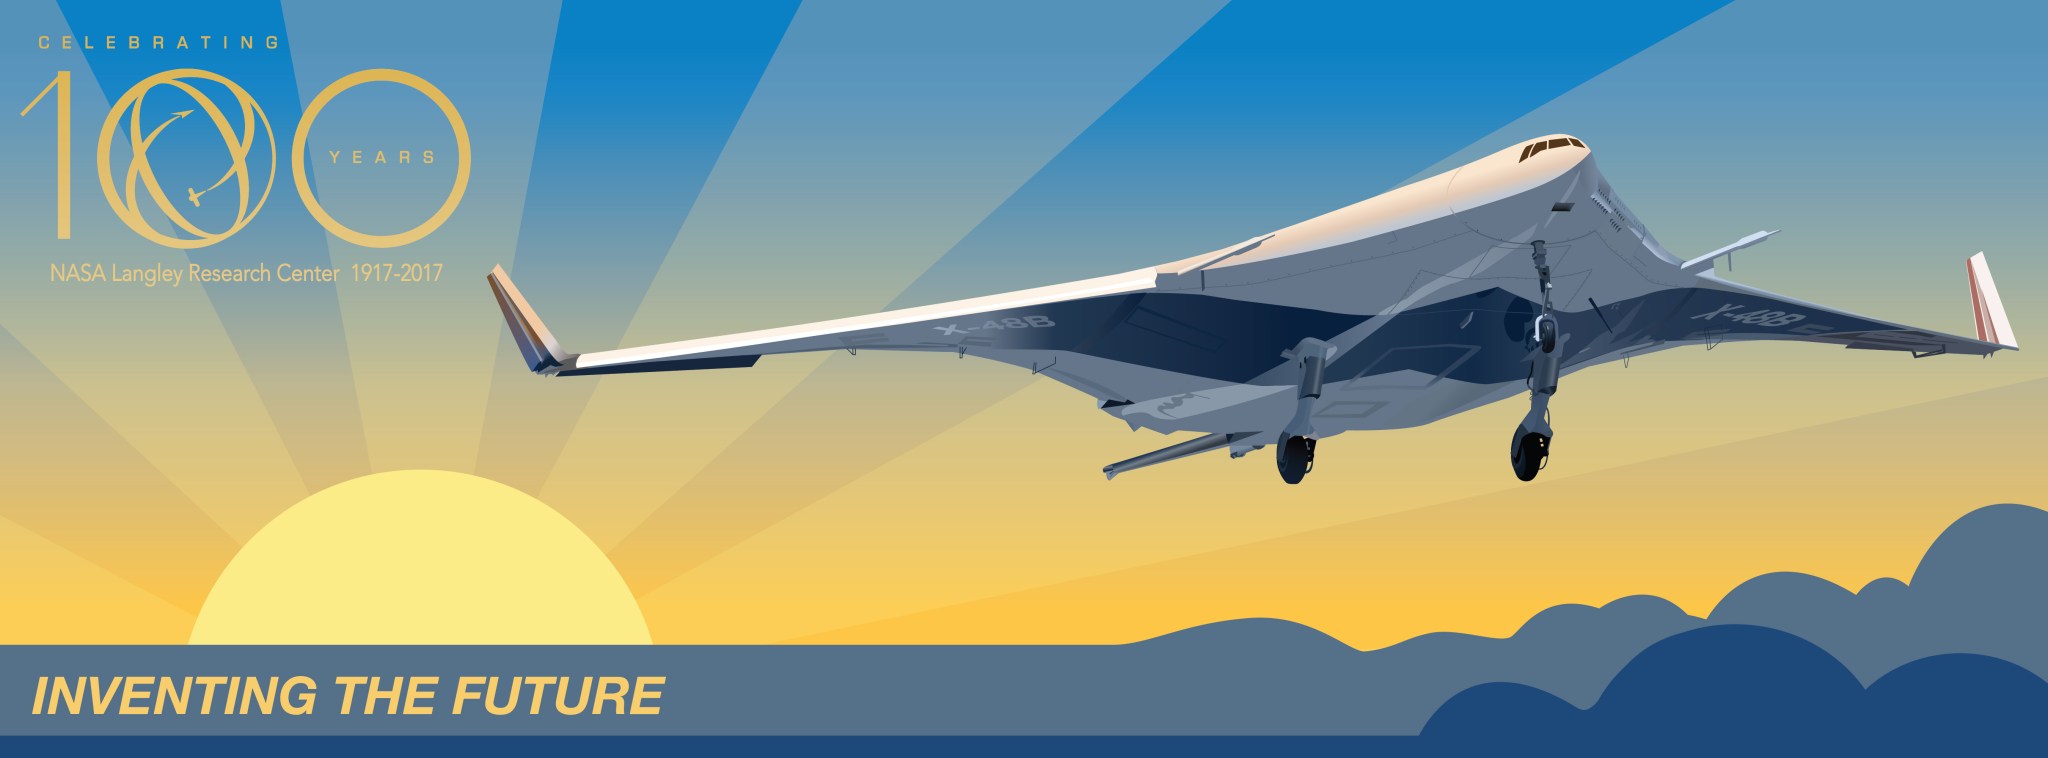 This is a vector graphic of a plane soaring over a horizon. There is text in the image that reads "Inventing The Future" and "A Storied Legacy, A Soaring Future."